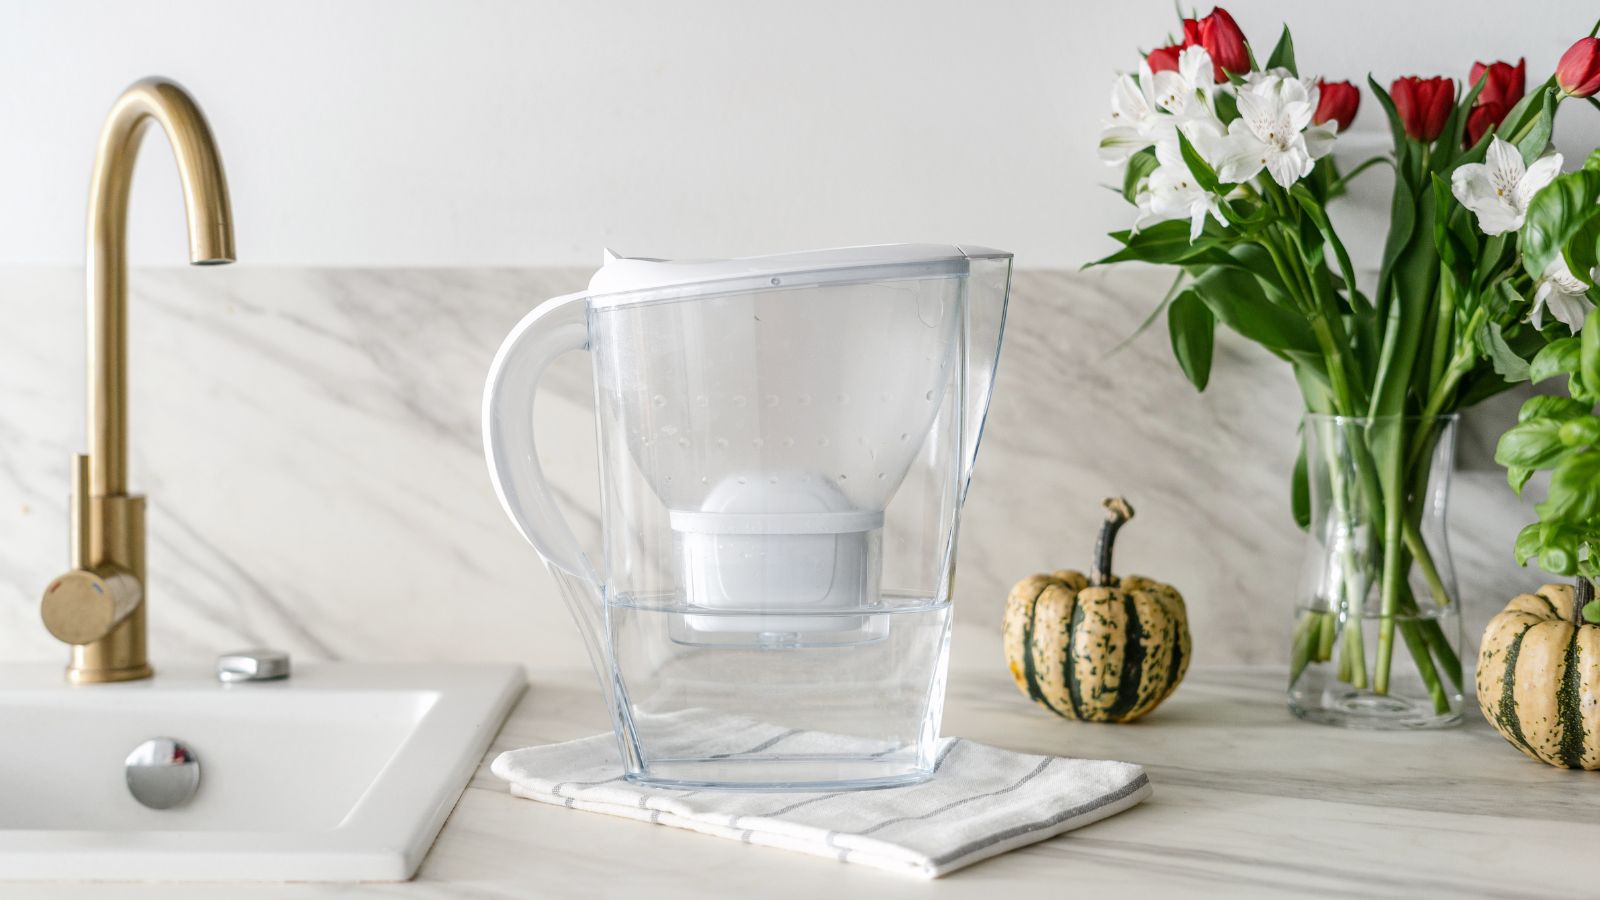 How To Clean Mildew From A Brita Pitcher